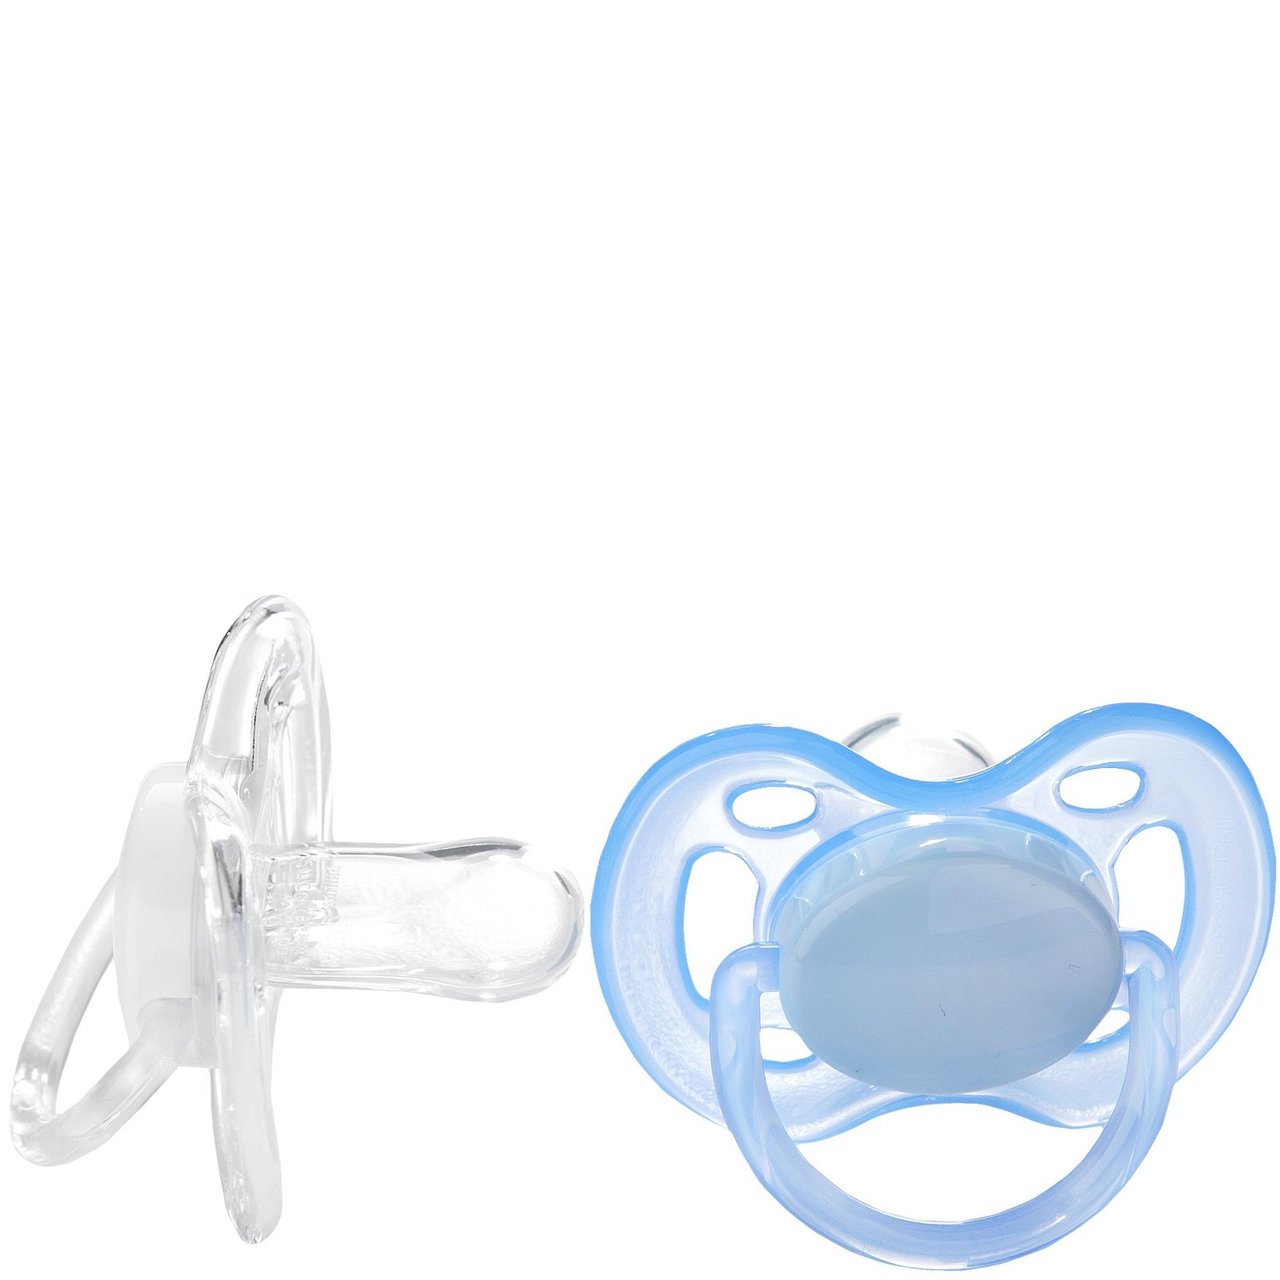 AVENT Silicone Freeflow Pacifiers, 0-6 m, 2 pk, BPA Free - Parents' Favorite